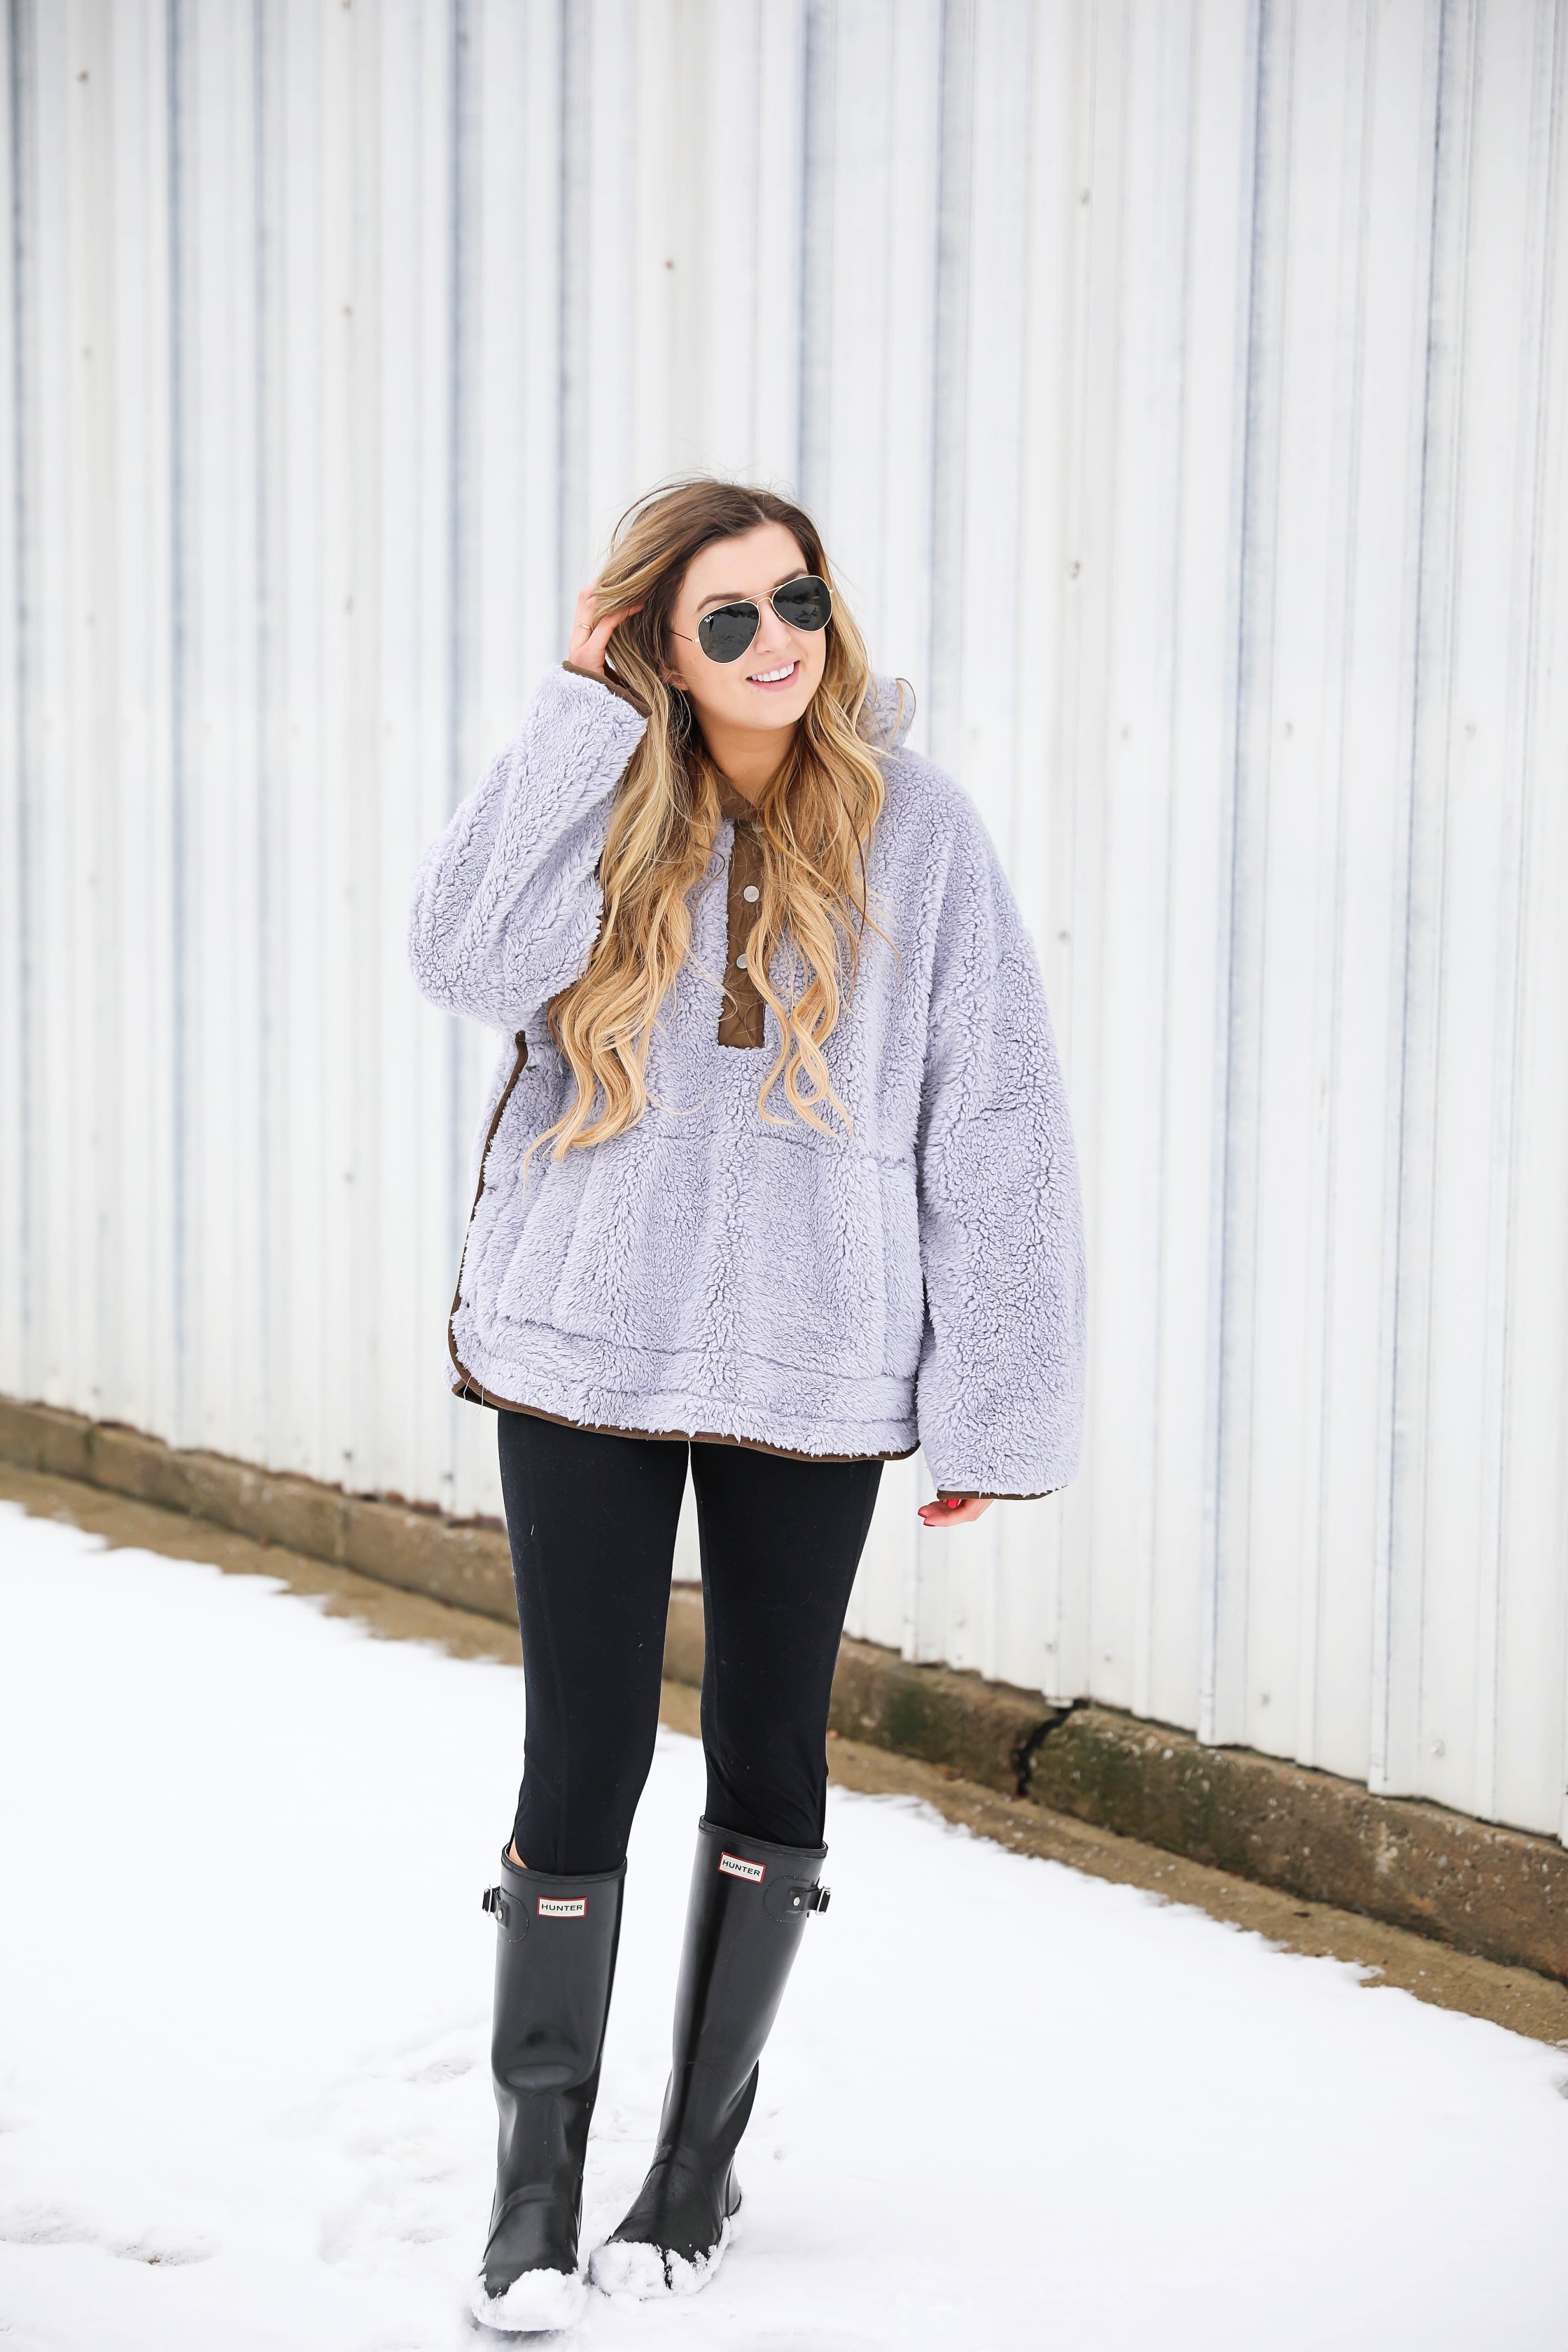 Free People Sweatshirt! I love this cozy grey pullover, it is so soft and comy! Get these casual outfit details on fashion blog daily dose of charm by lauren lindmark